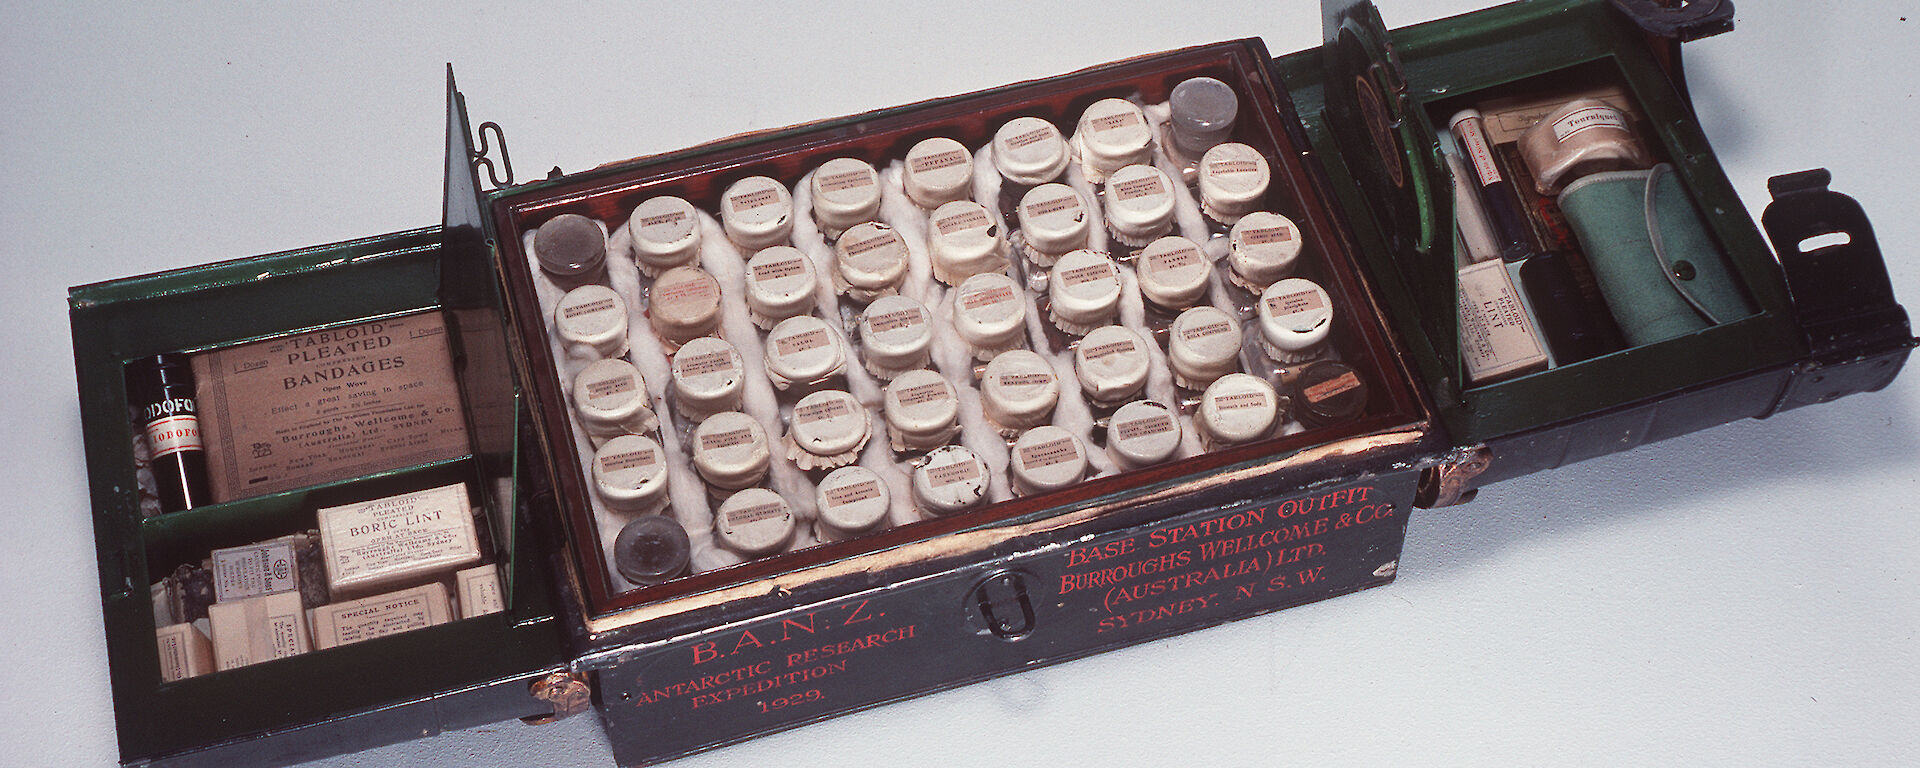 A Burroughs Wellcome & Co Ltd (Australia) Ltd Sydney medical chest used by the British, Australian and New Zealand Antarctic Research Expedition (BANZARE).